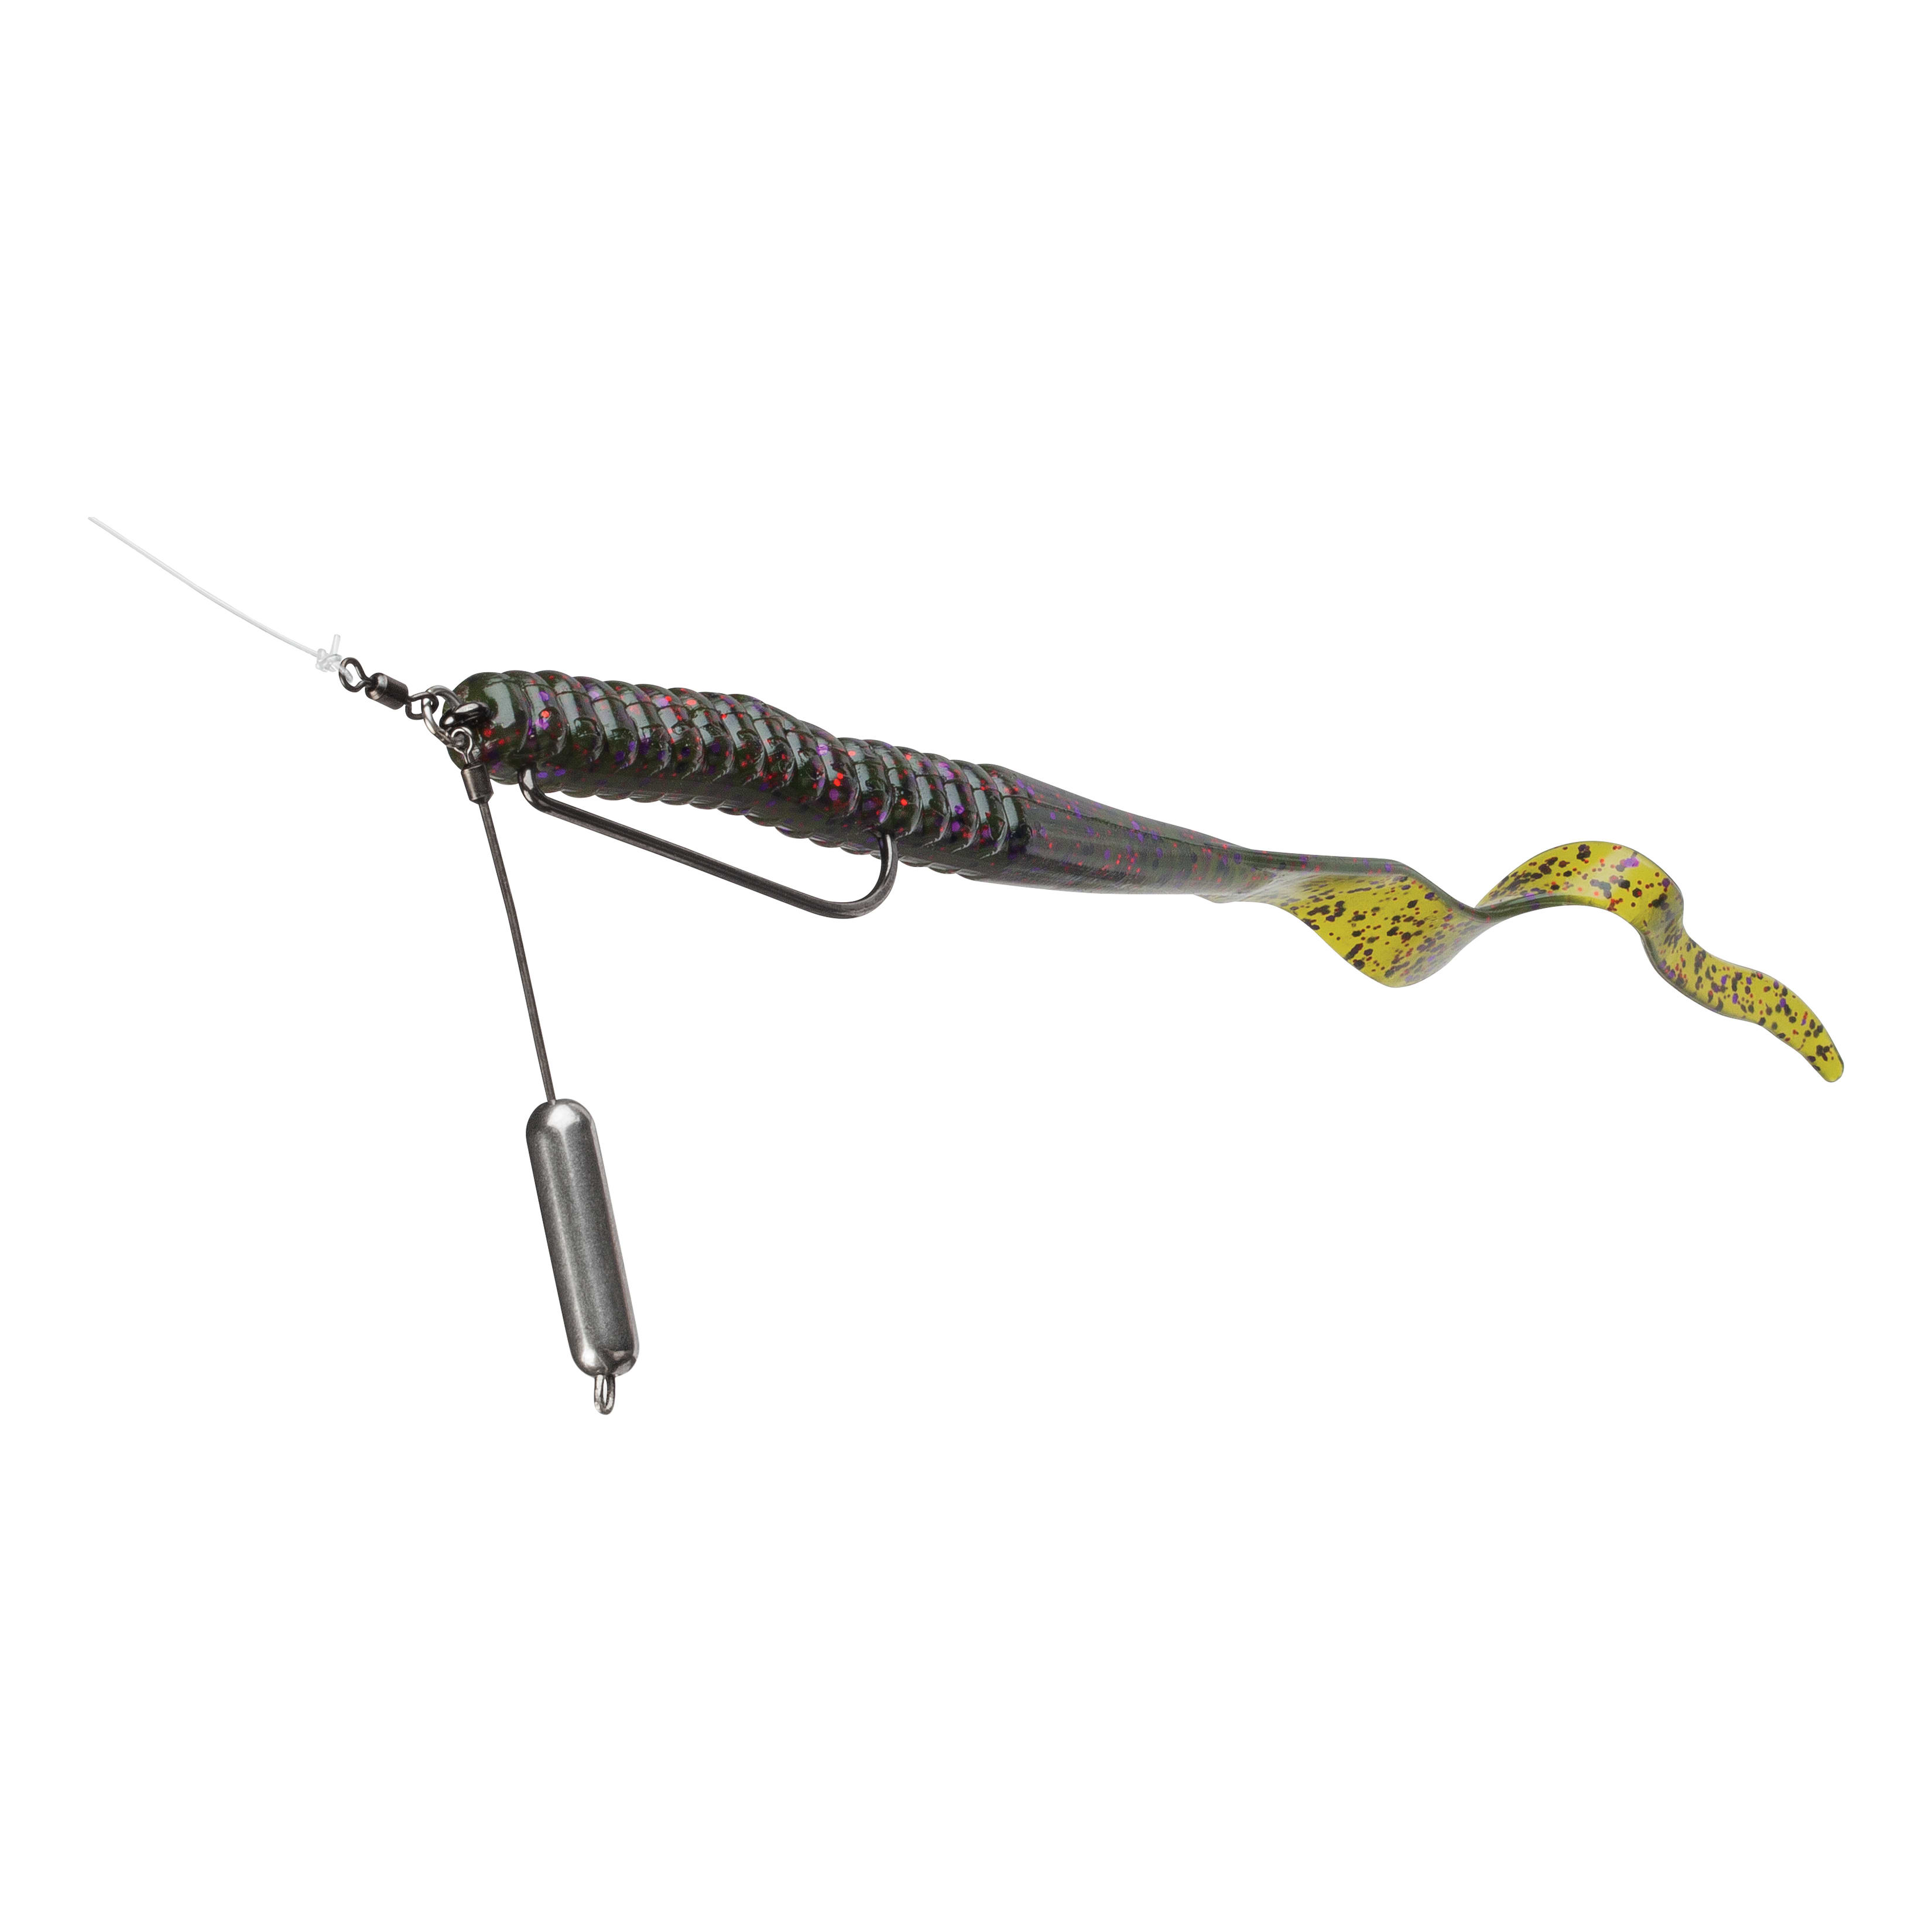 VMC® Tokyo Rig Heavy Duty Worm Hook - in use (lure not included)